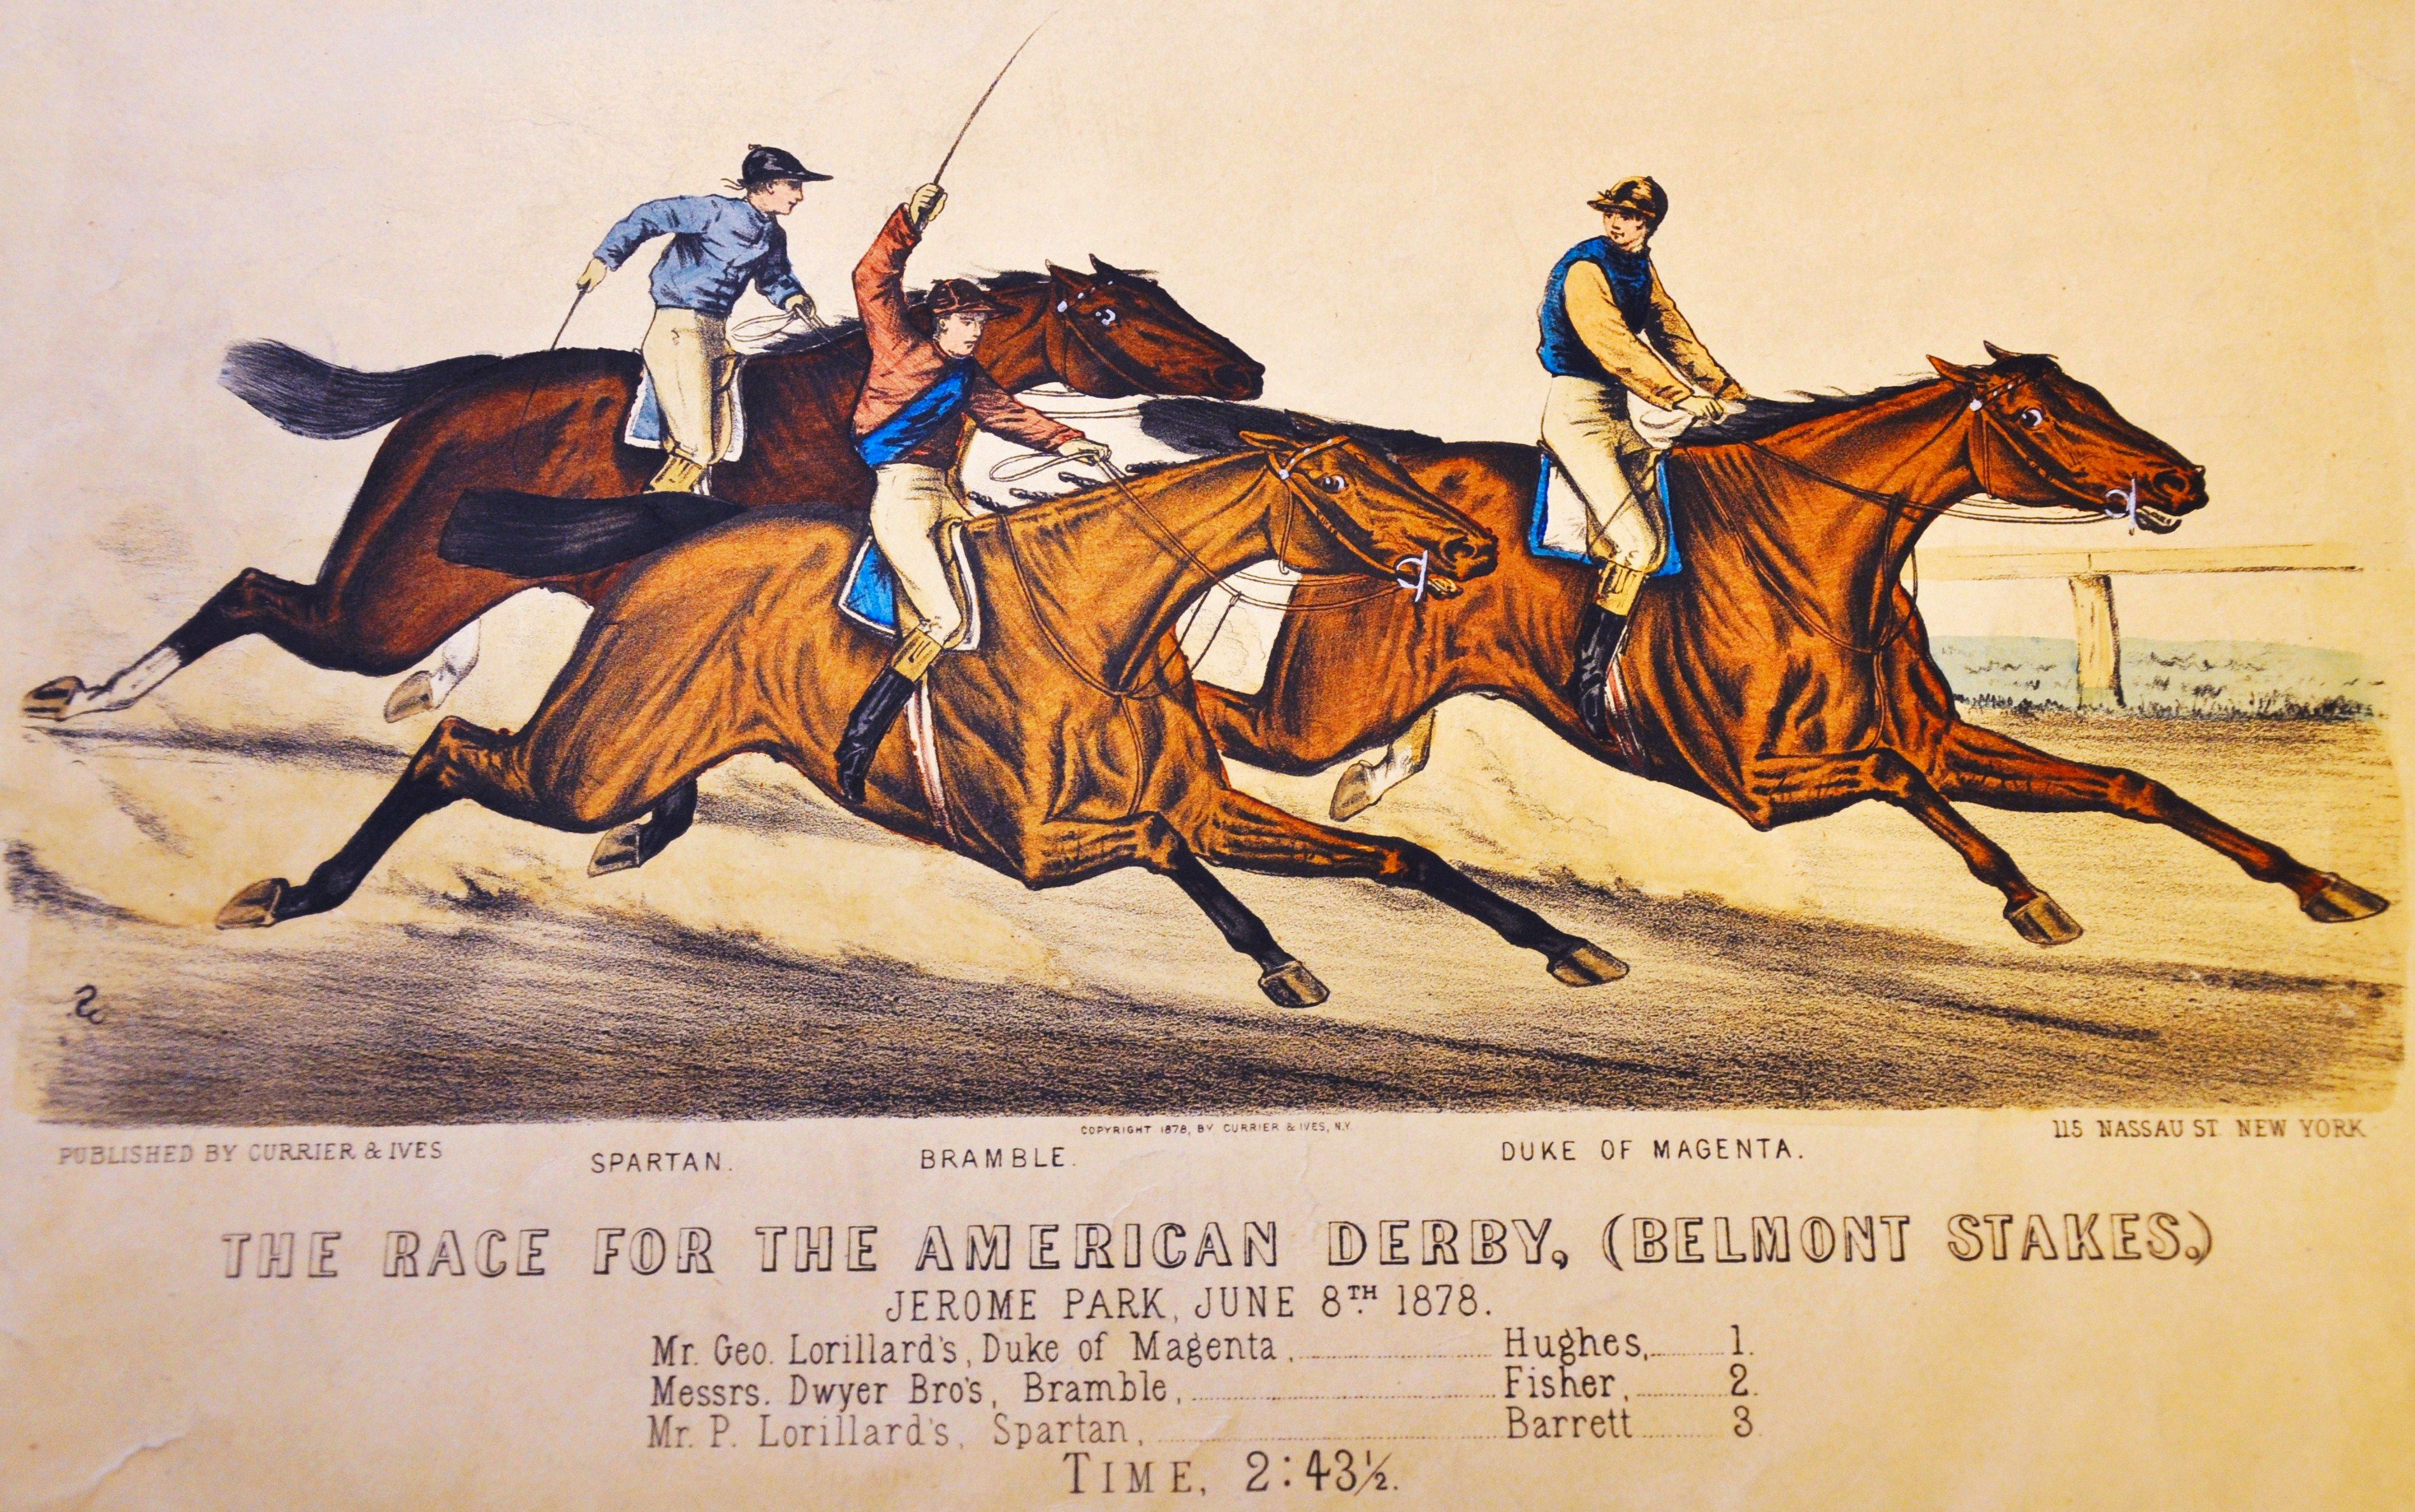 Currier & Ives print depicting the 1878 Belmont Stakes at Jerome Park, won by Duke of Magenta (Museum Collection)